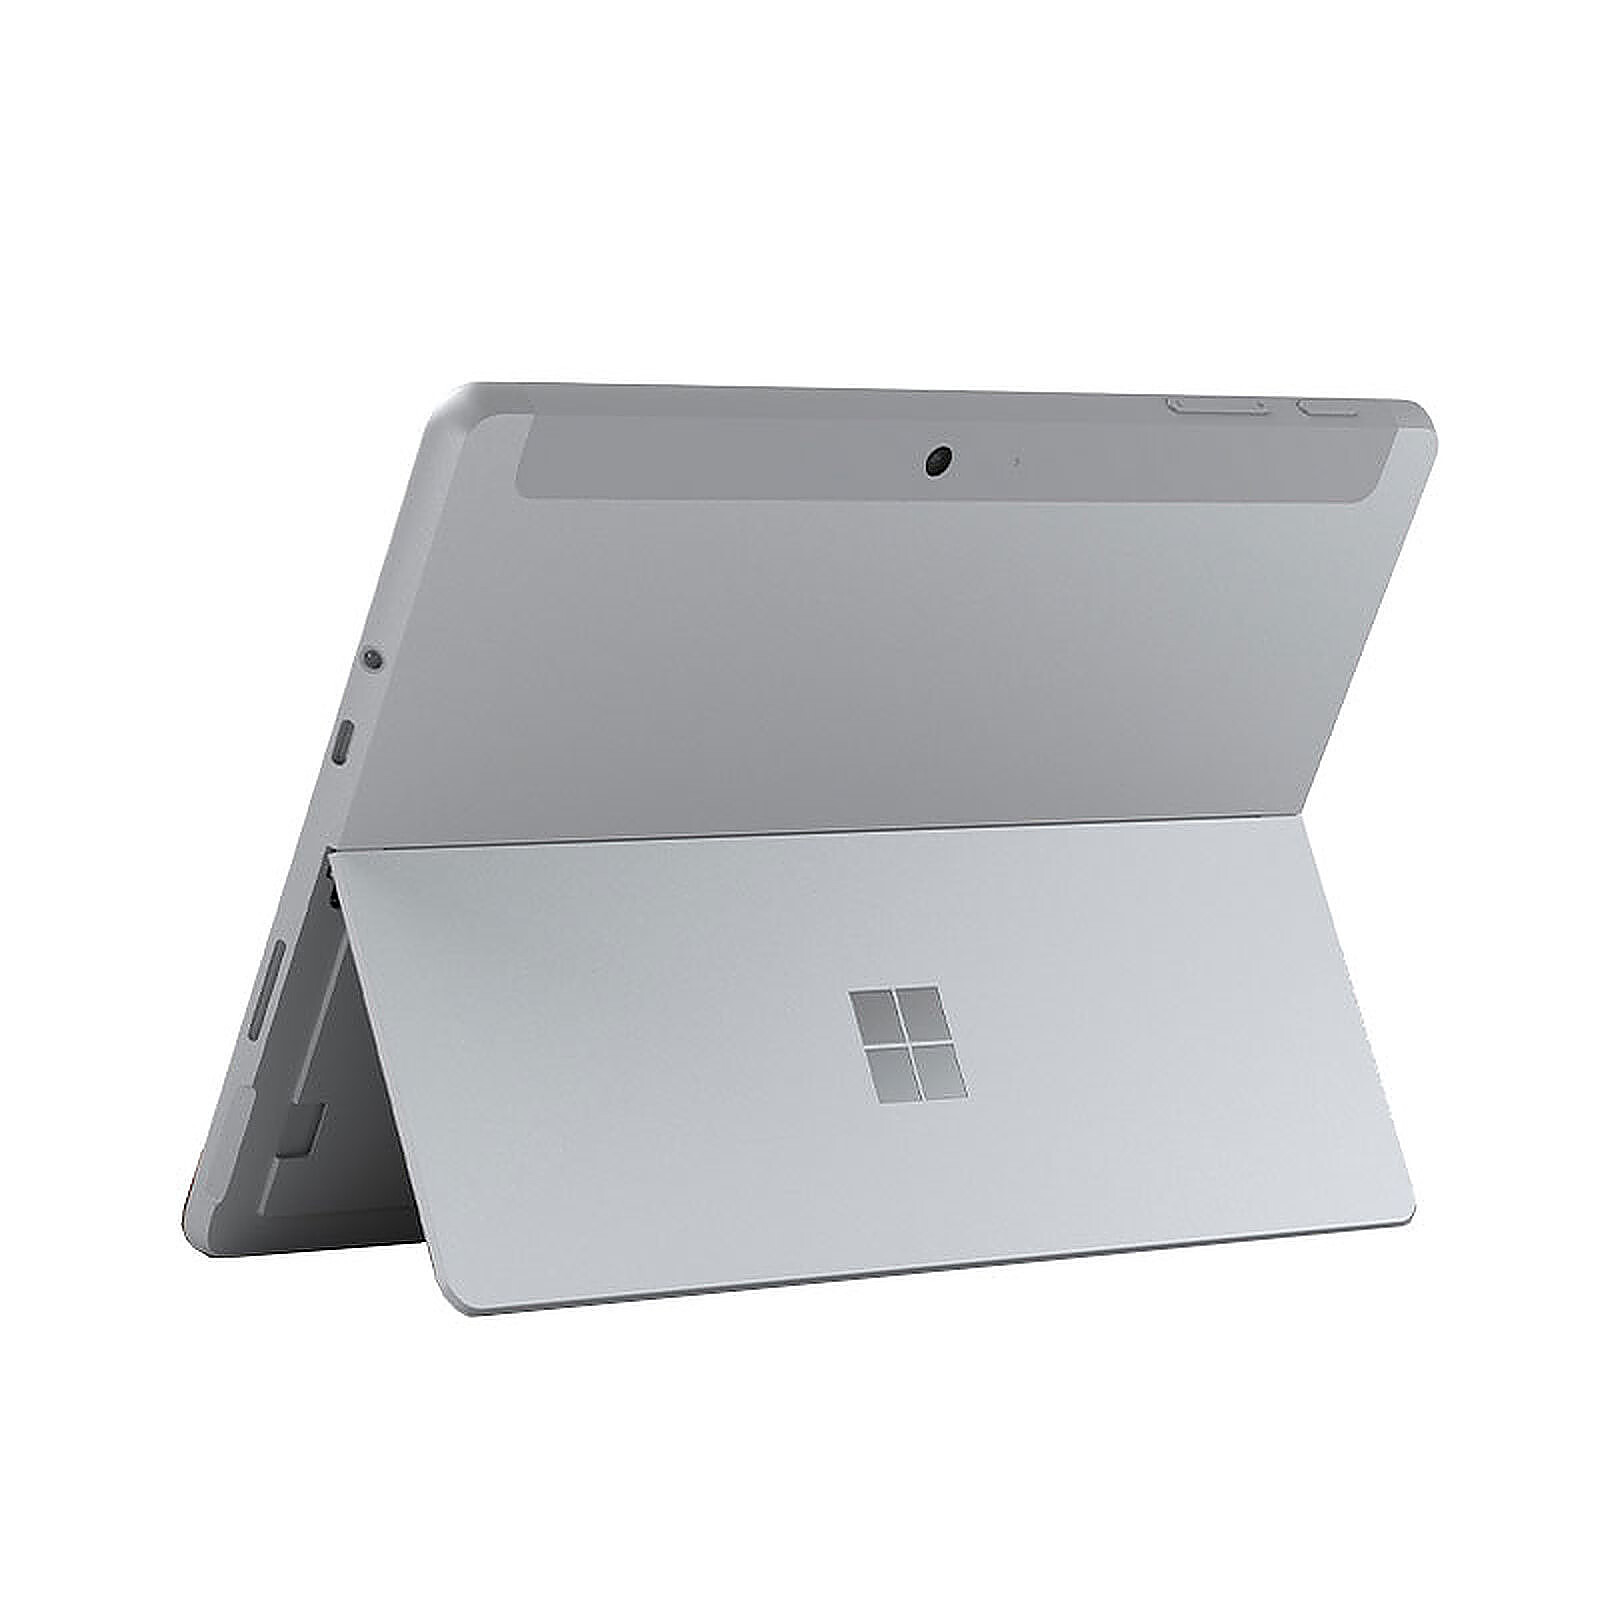 Surface Go 3 for Business